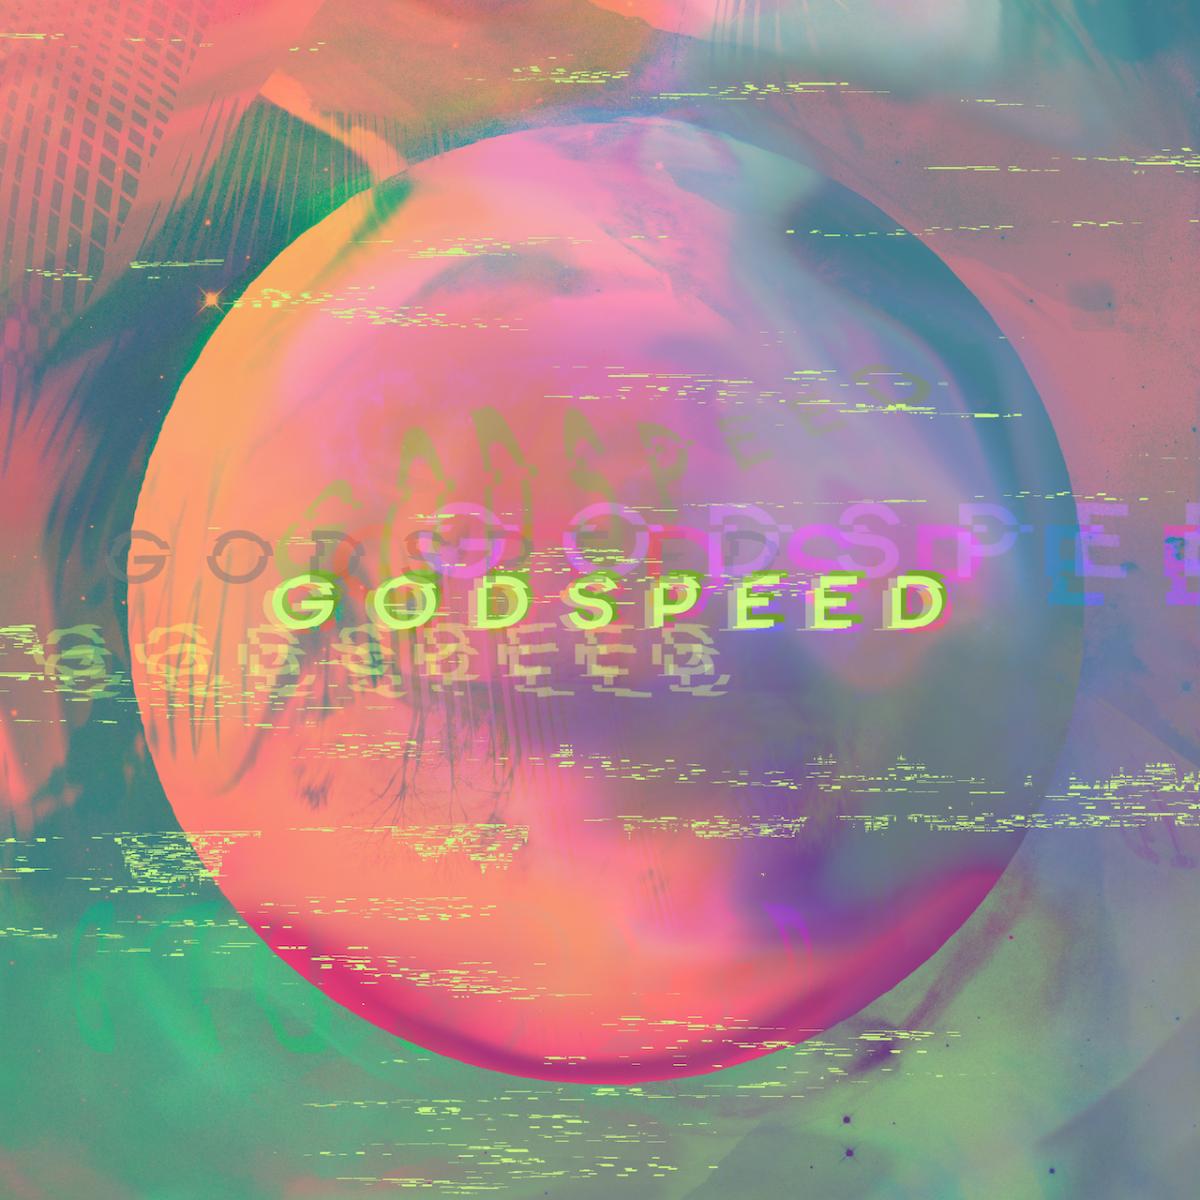 Album cover for Godspeed by Dear Gravity, Echoes Blue Music’s latest release